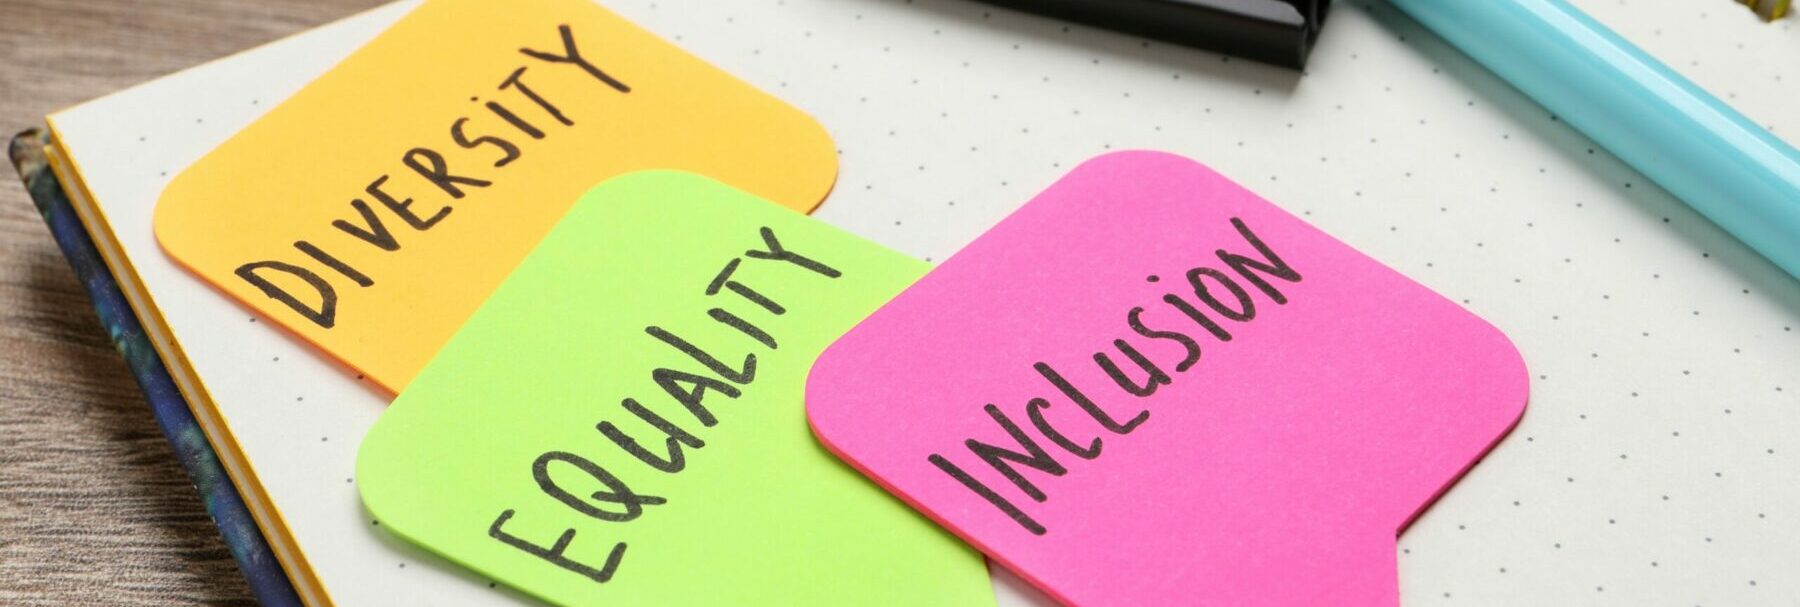 Equity, diversity, inclusion